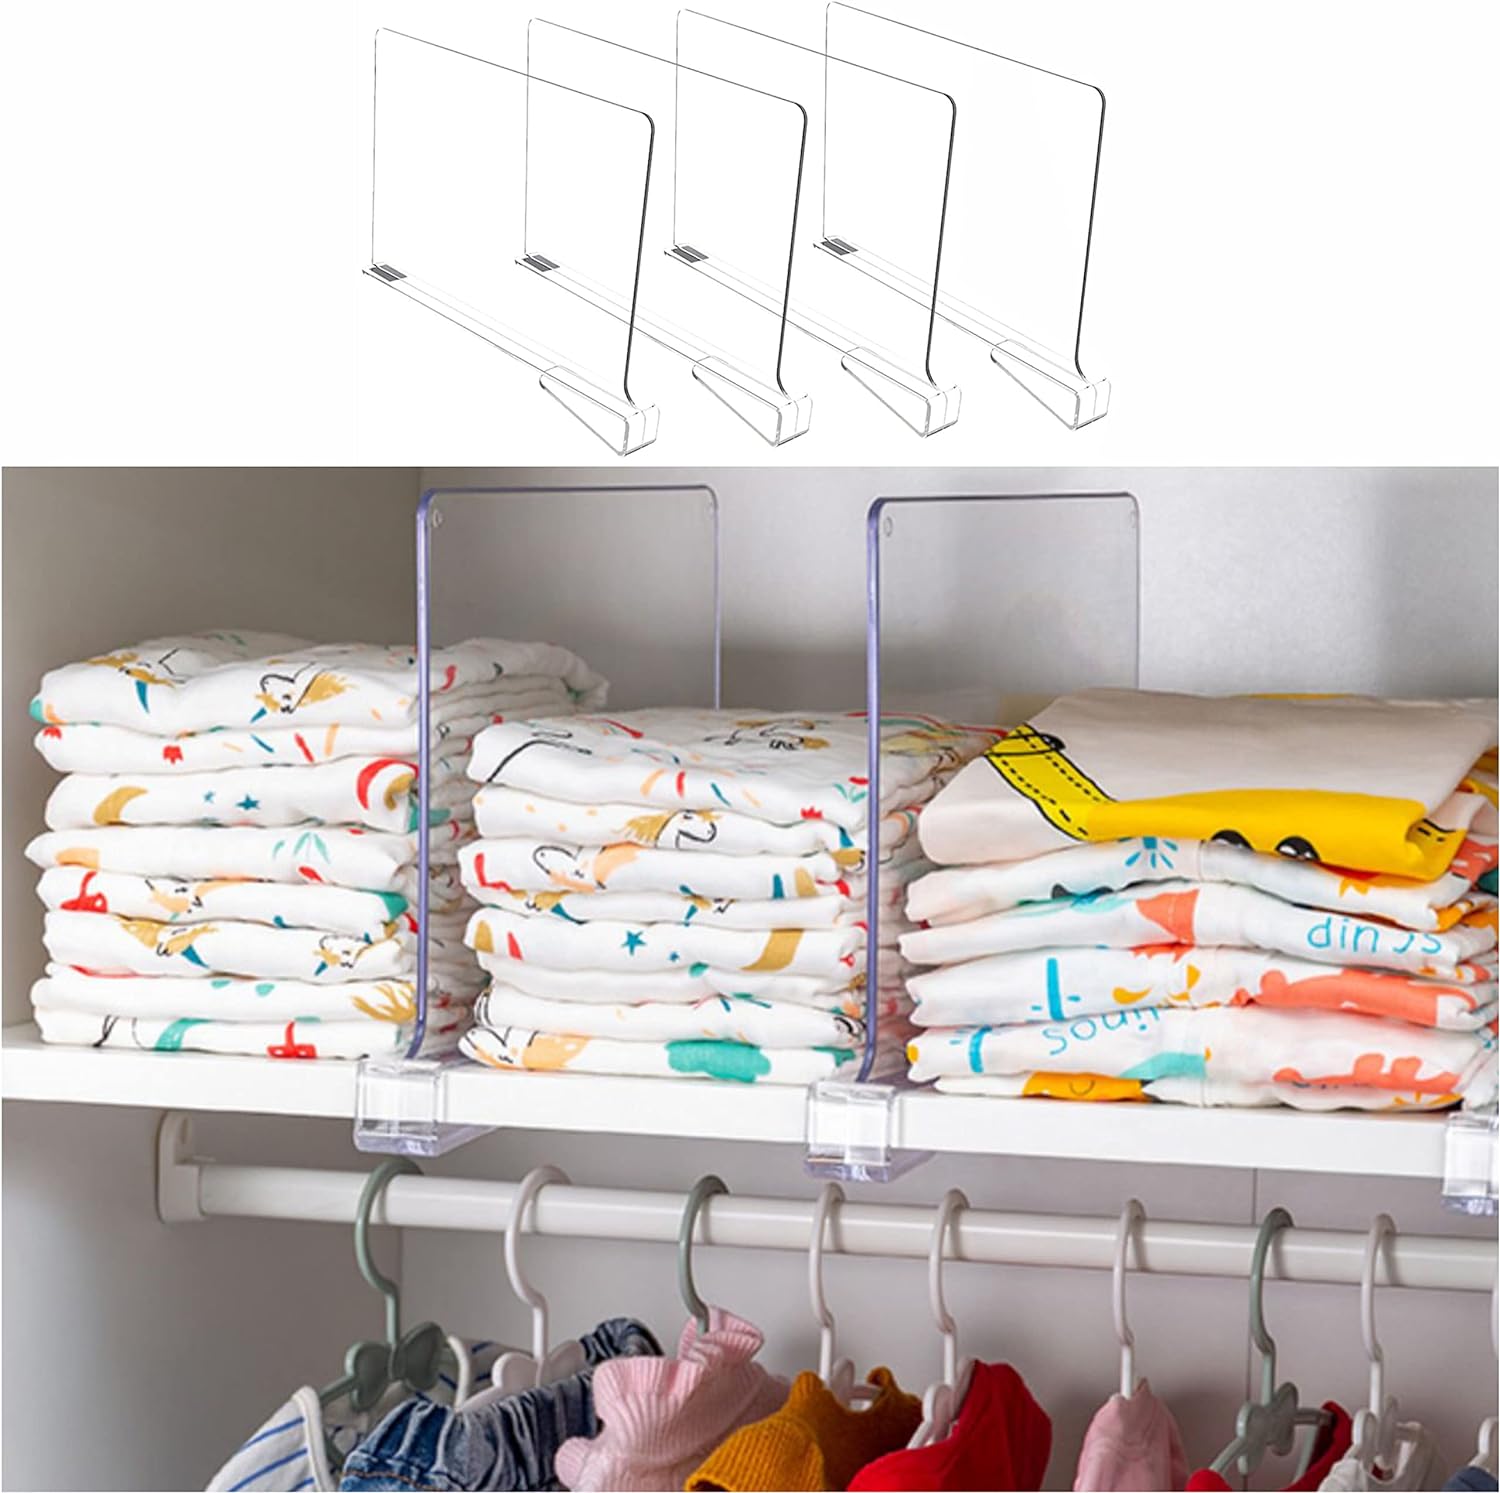 These dividers were easy to install, sturdy and just the right height for my purposes. I used them to separate the folded clothes on the shelf in my husbands closet. It seemed that every time I did laundry, I had to take everything out, fold the things on the self, then put the clean items back on top! Now when he pulls his clothes out, they dont fall over into a big pile. Everything stays where it should be and I can just put the clean stuff on top! I think these would be great to organize pu